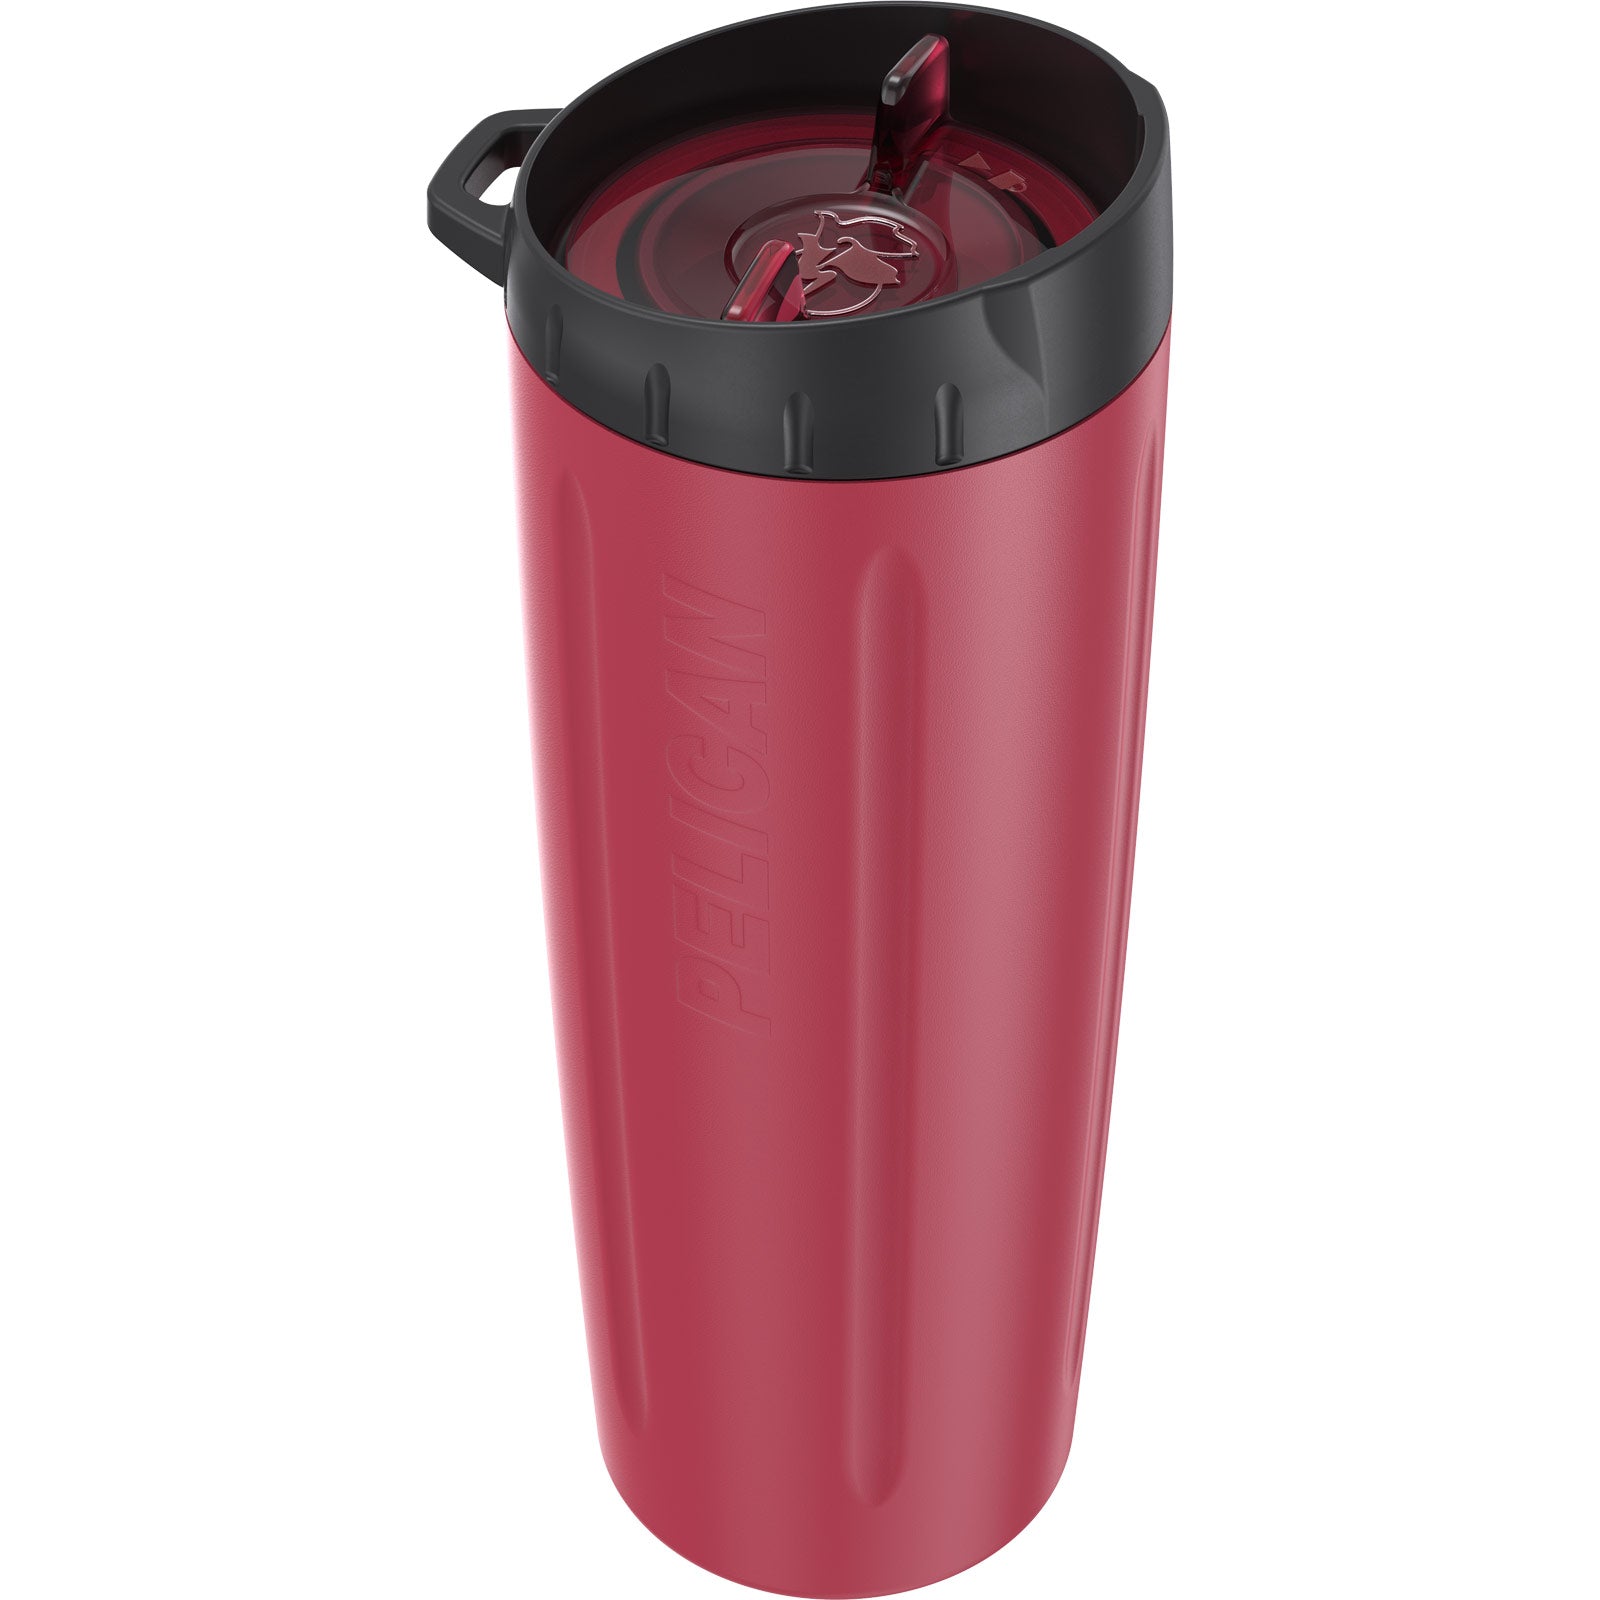 Pelican Products Dayventure Tumbler 10 oz, 16 oz, or 22 oz - Survival & Outdoors